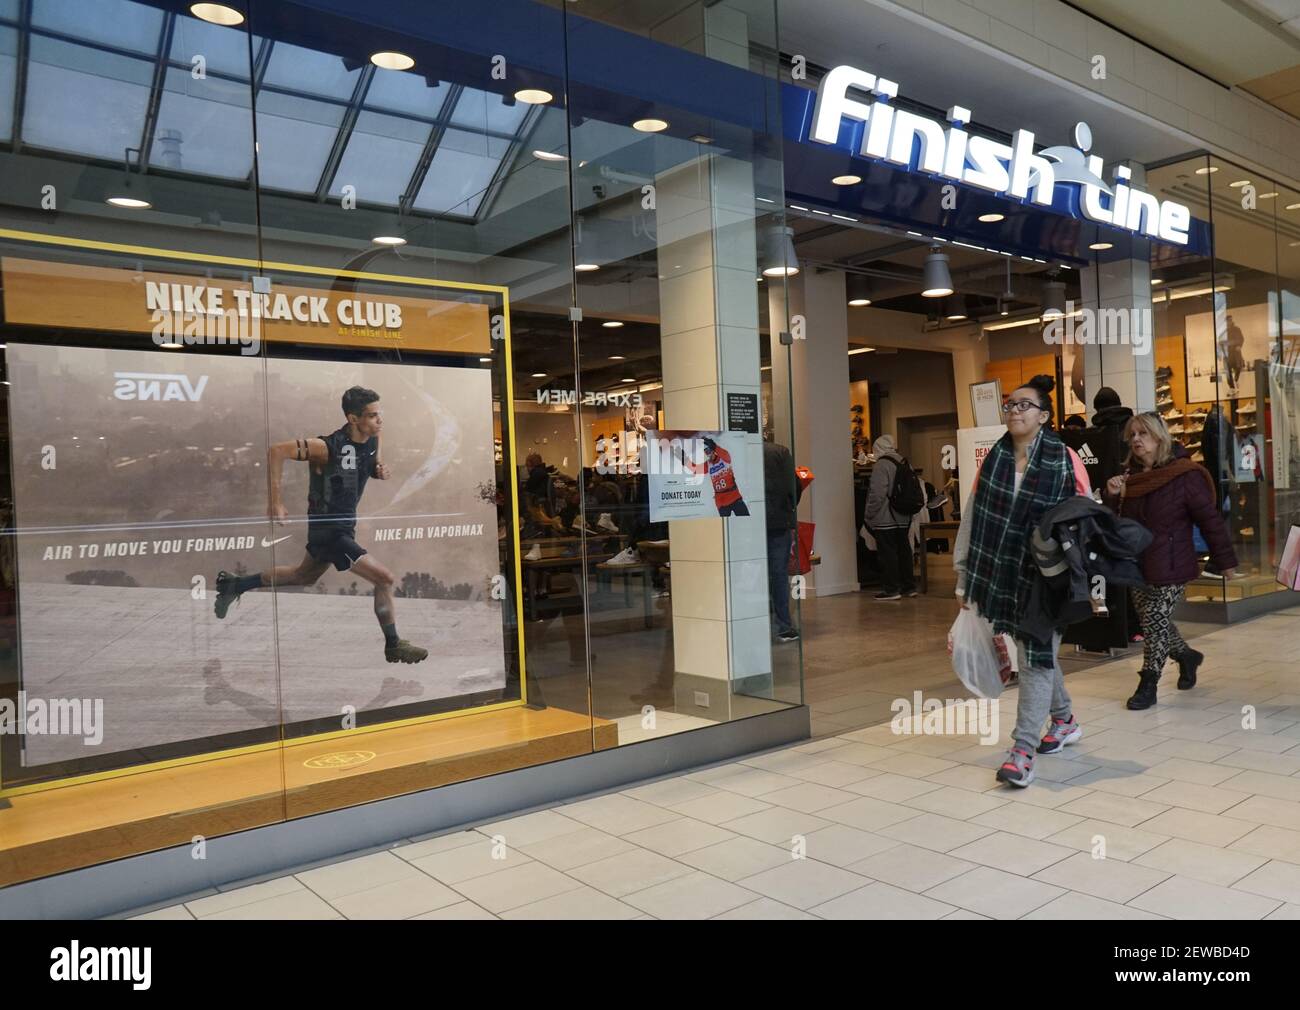 Shoppers pass the Finish Line store in the Queens Center Mall in the  borough of Queens in New York on Sunday, December 17, 2017, a week before  Christmas. Retailers are reporting a